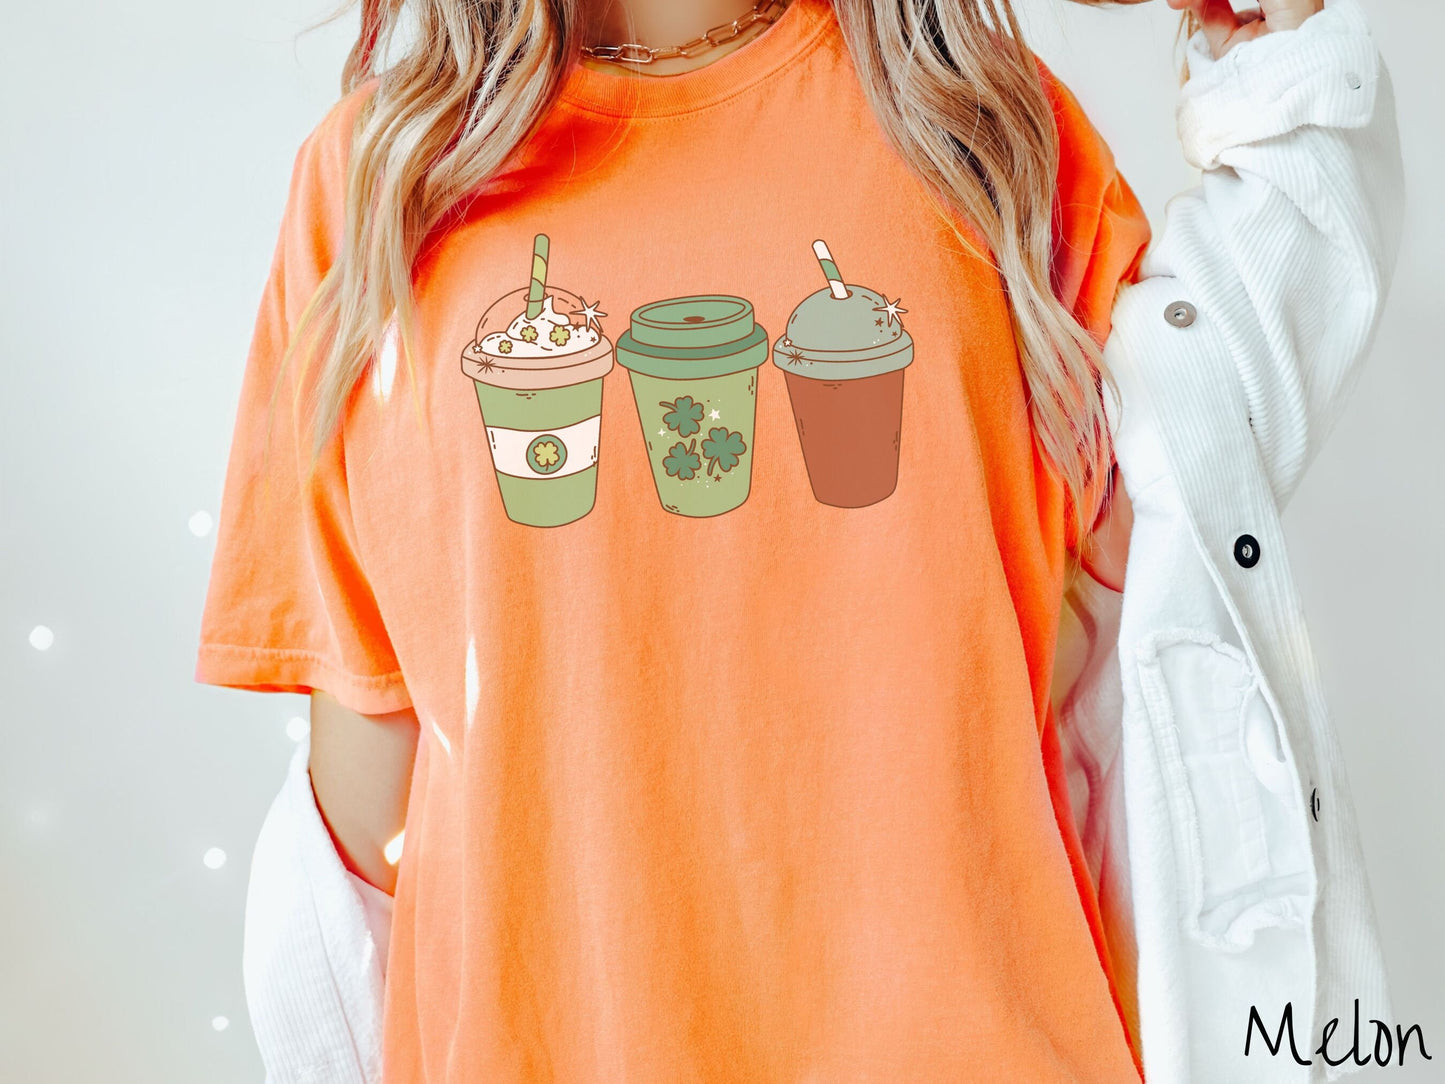 A woman wearing a vintage, melon colored shirt with three coffee cups, one is white and green with a clear lid showing whipped cream topping with green clover sprinkles, another green cup with green clovers, and the third is brown with a green lid.